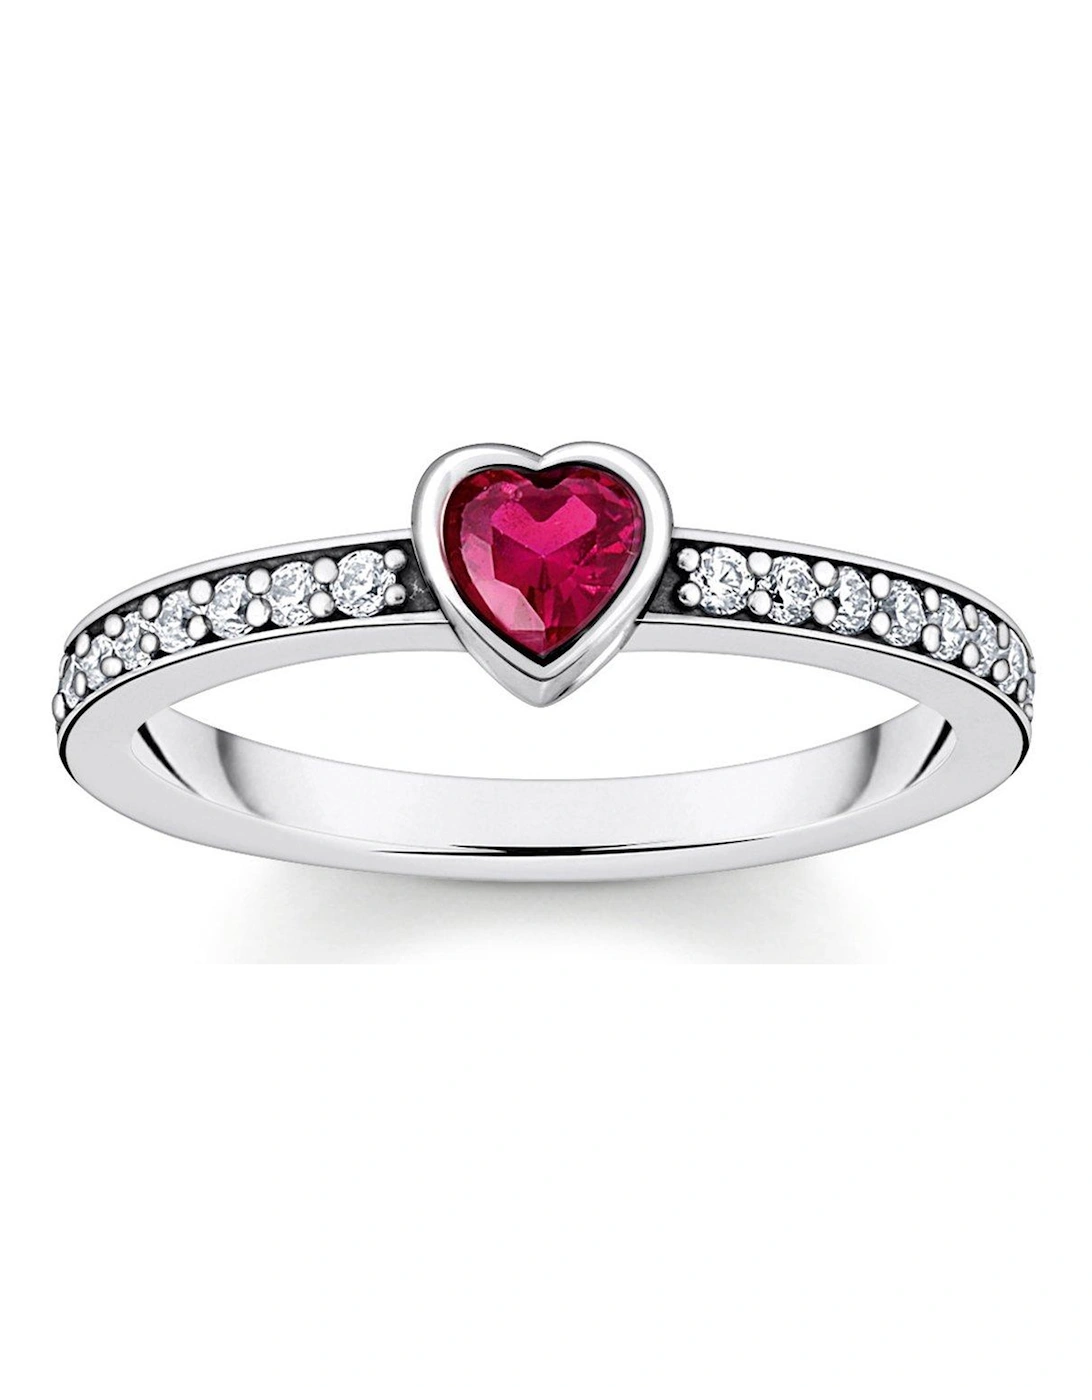 Solitaire Heart Ring: Sparkling romance with red heart-cut stone, white zirconia band, FOLLOW YOUR HEART engraving, 2 of 1